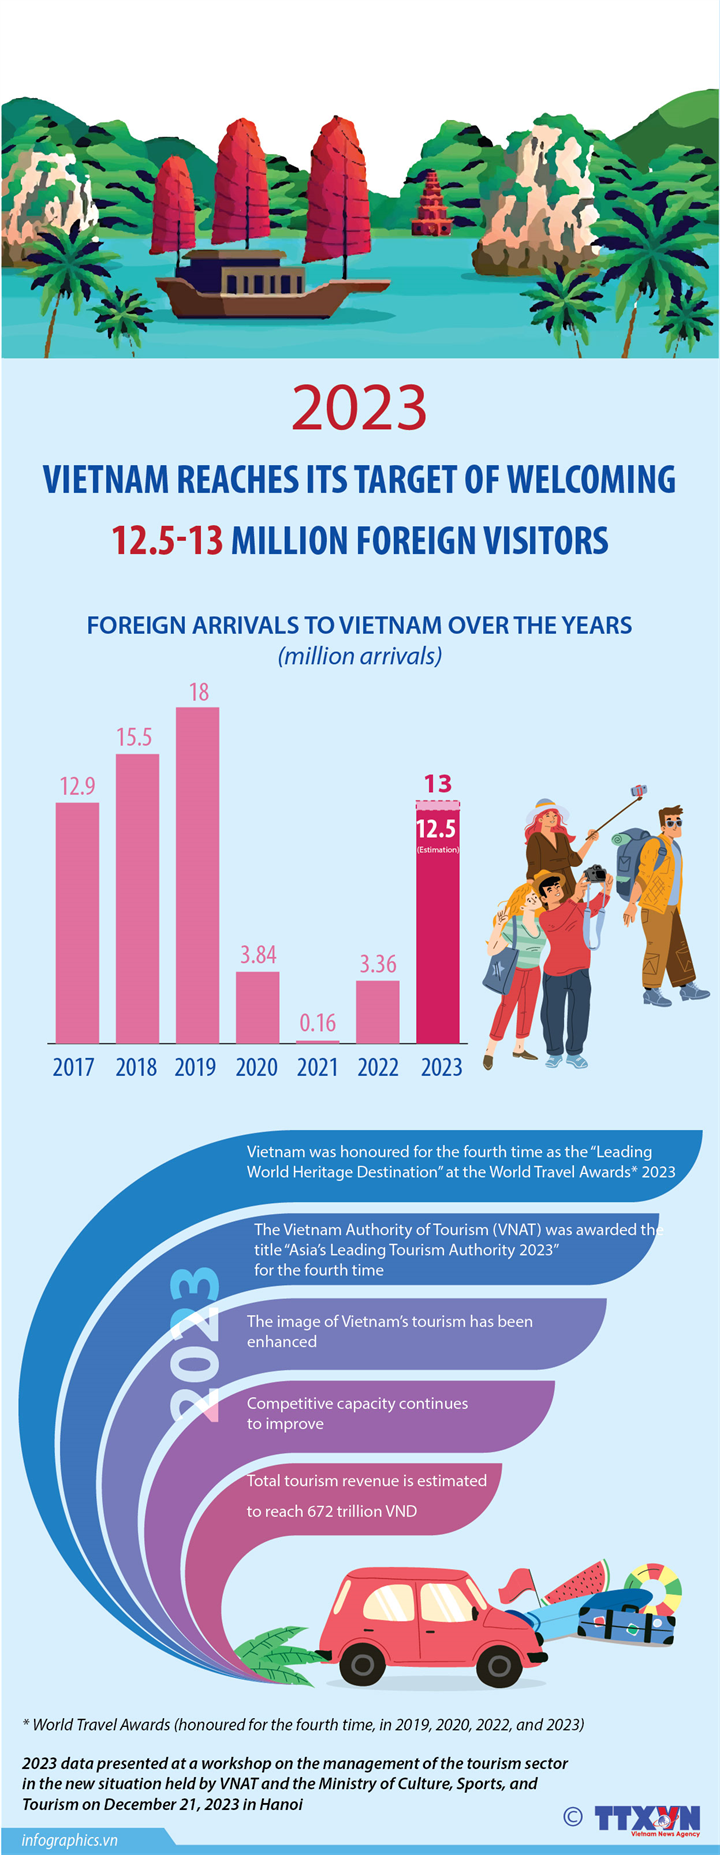 Vietnam reaches target of 12.5-13 million foreign visitors in 2023